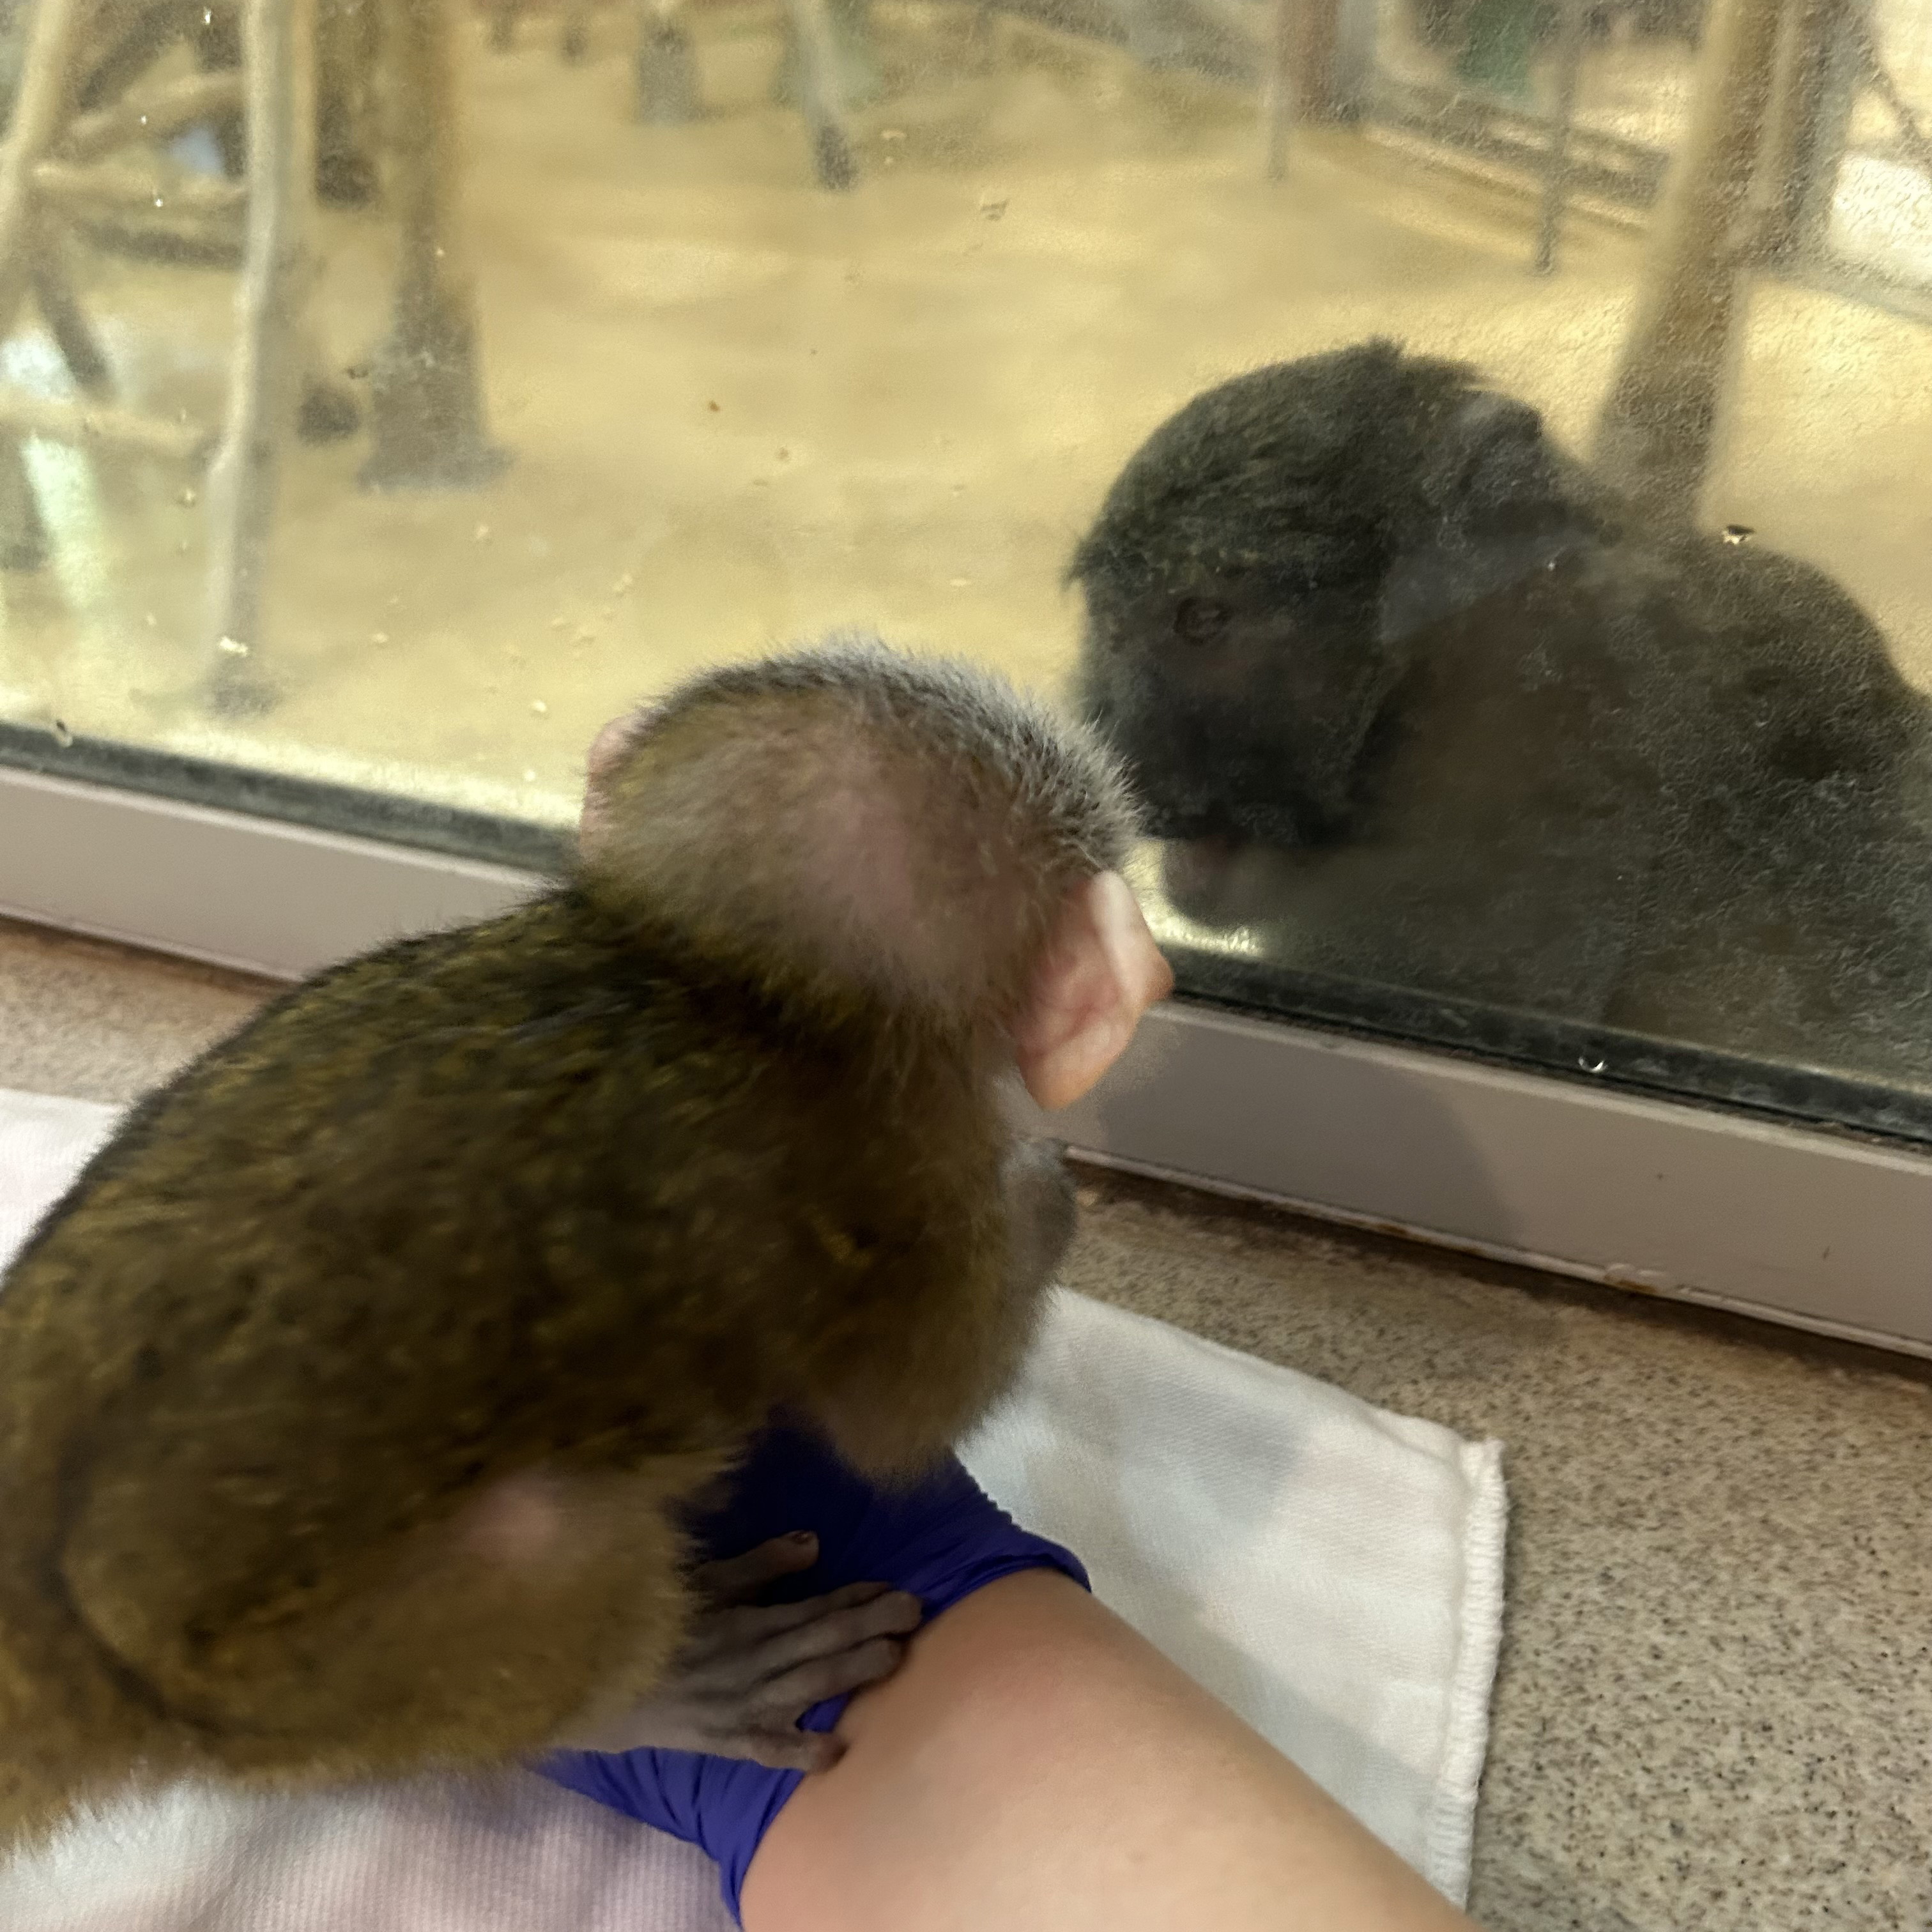 A baby monkey and an adult male monkey look at each other while separated by a pane of glass. Though father and son, they have not yet met.